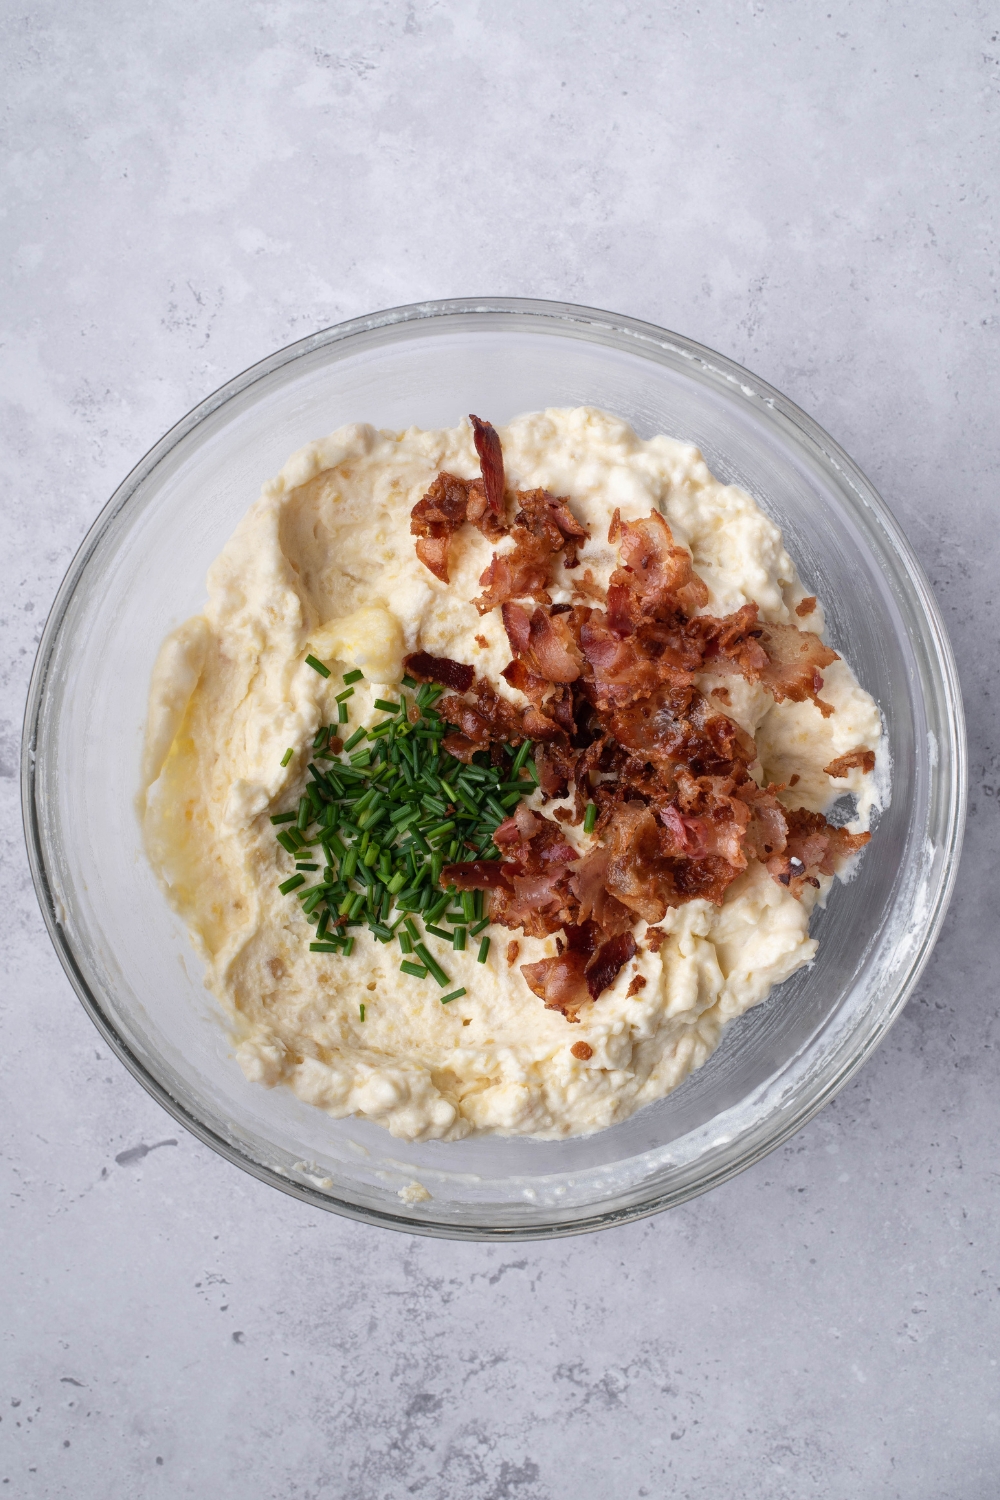 A mixing bowl with mashed potatoes, chives, and bacon bits.